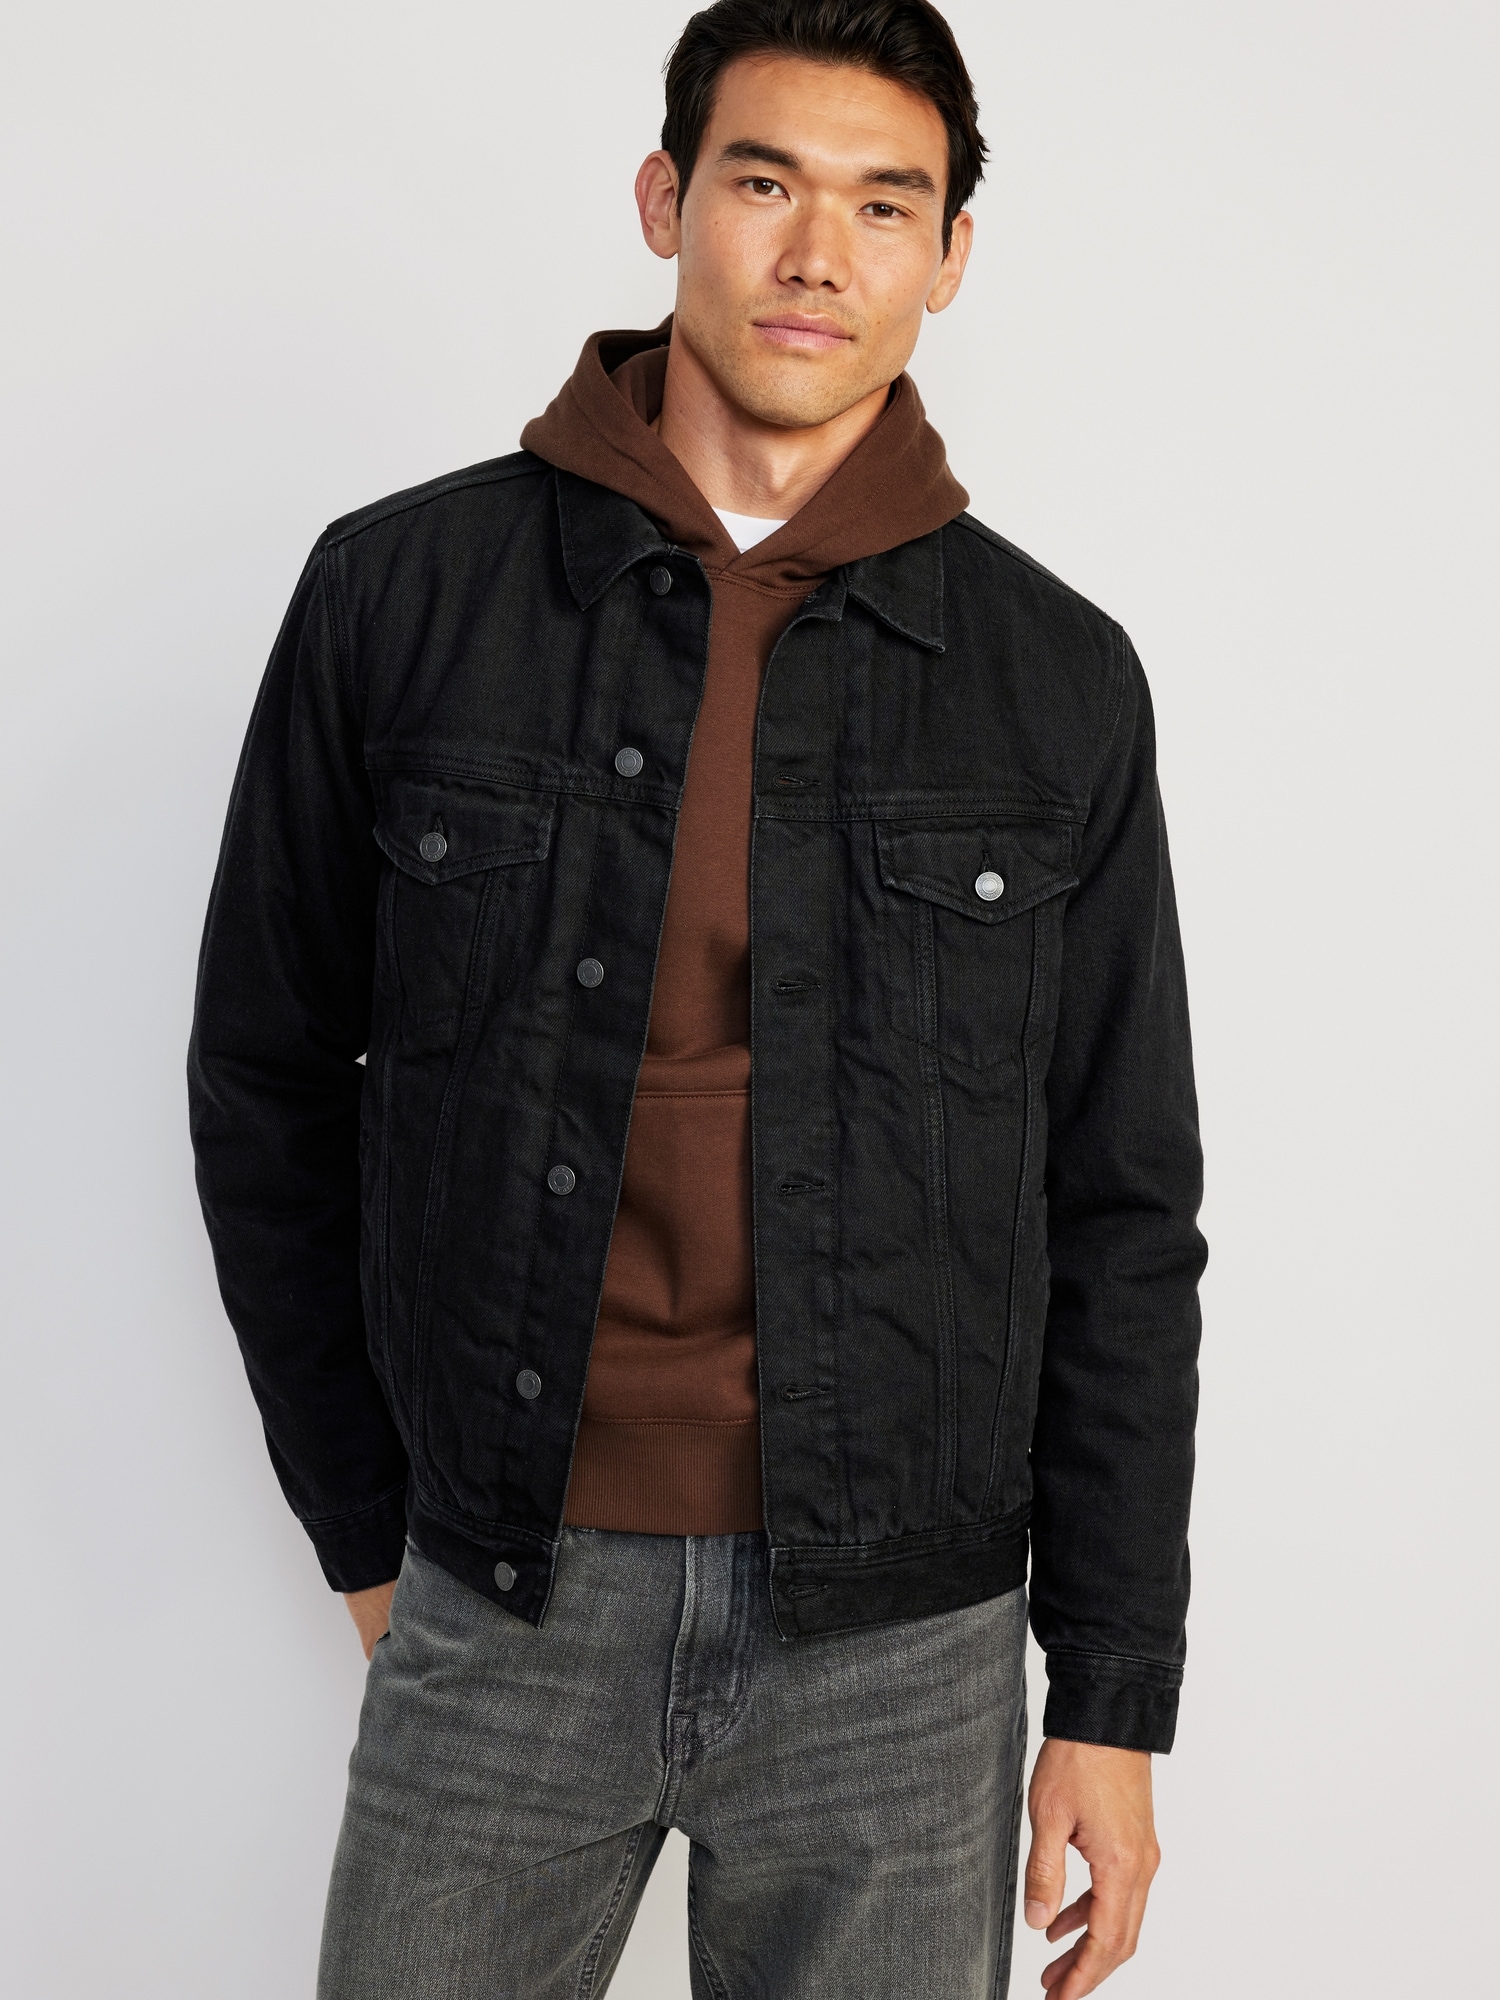 Cozy-Lined Non-Stretch Black Jean Jacket for Men | Old Navy